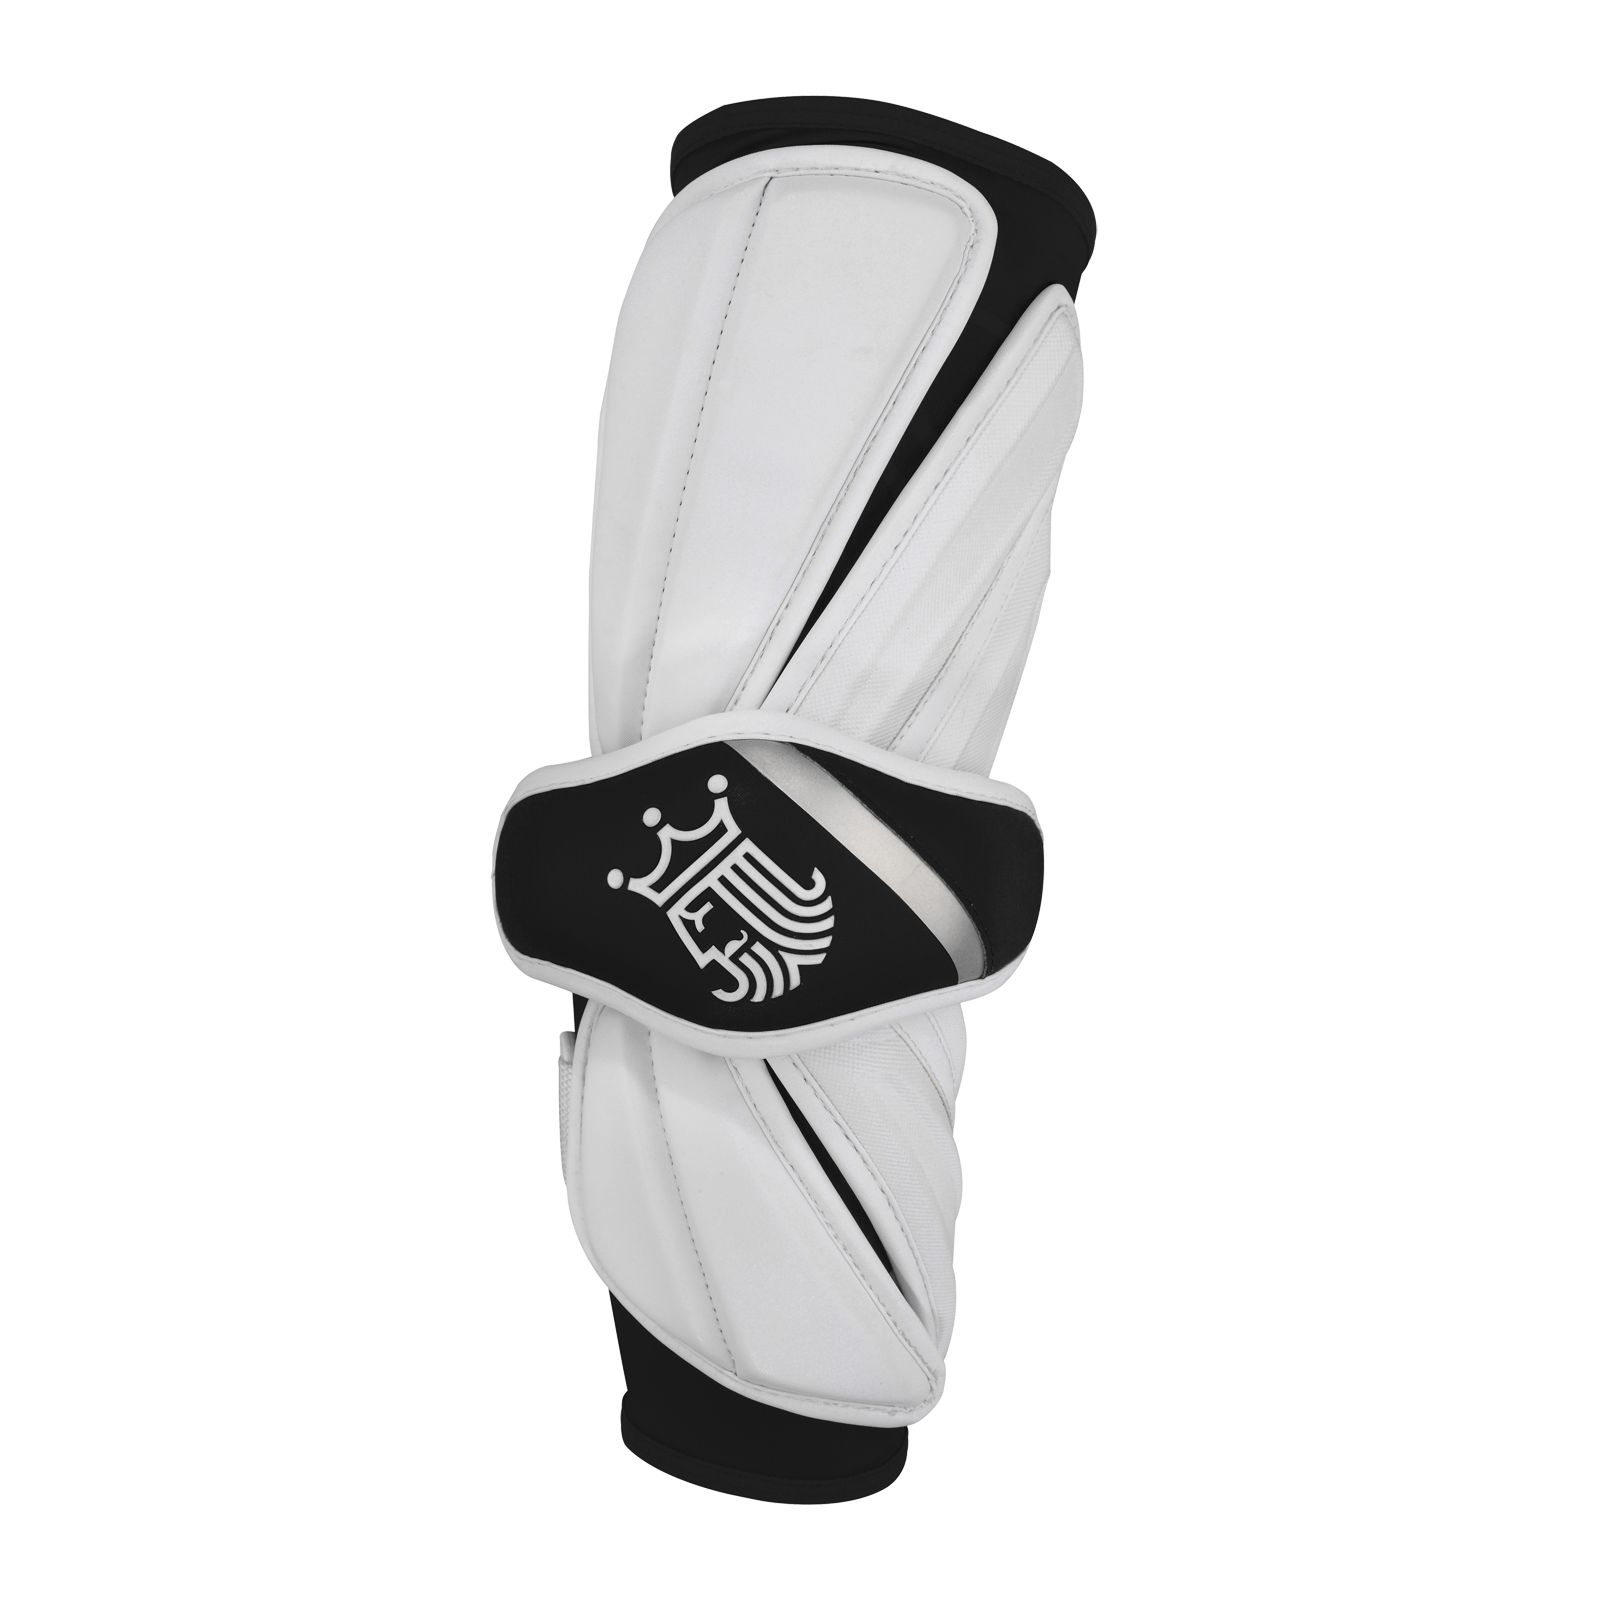 King V Arm Guard, Black with White image number 0